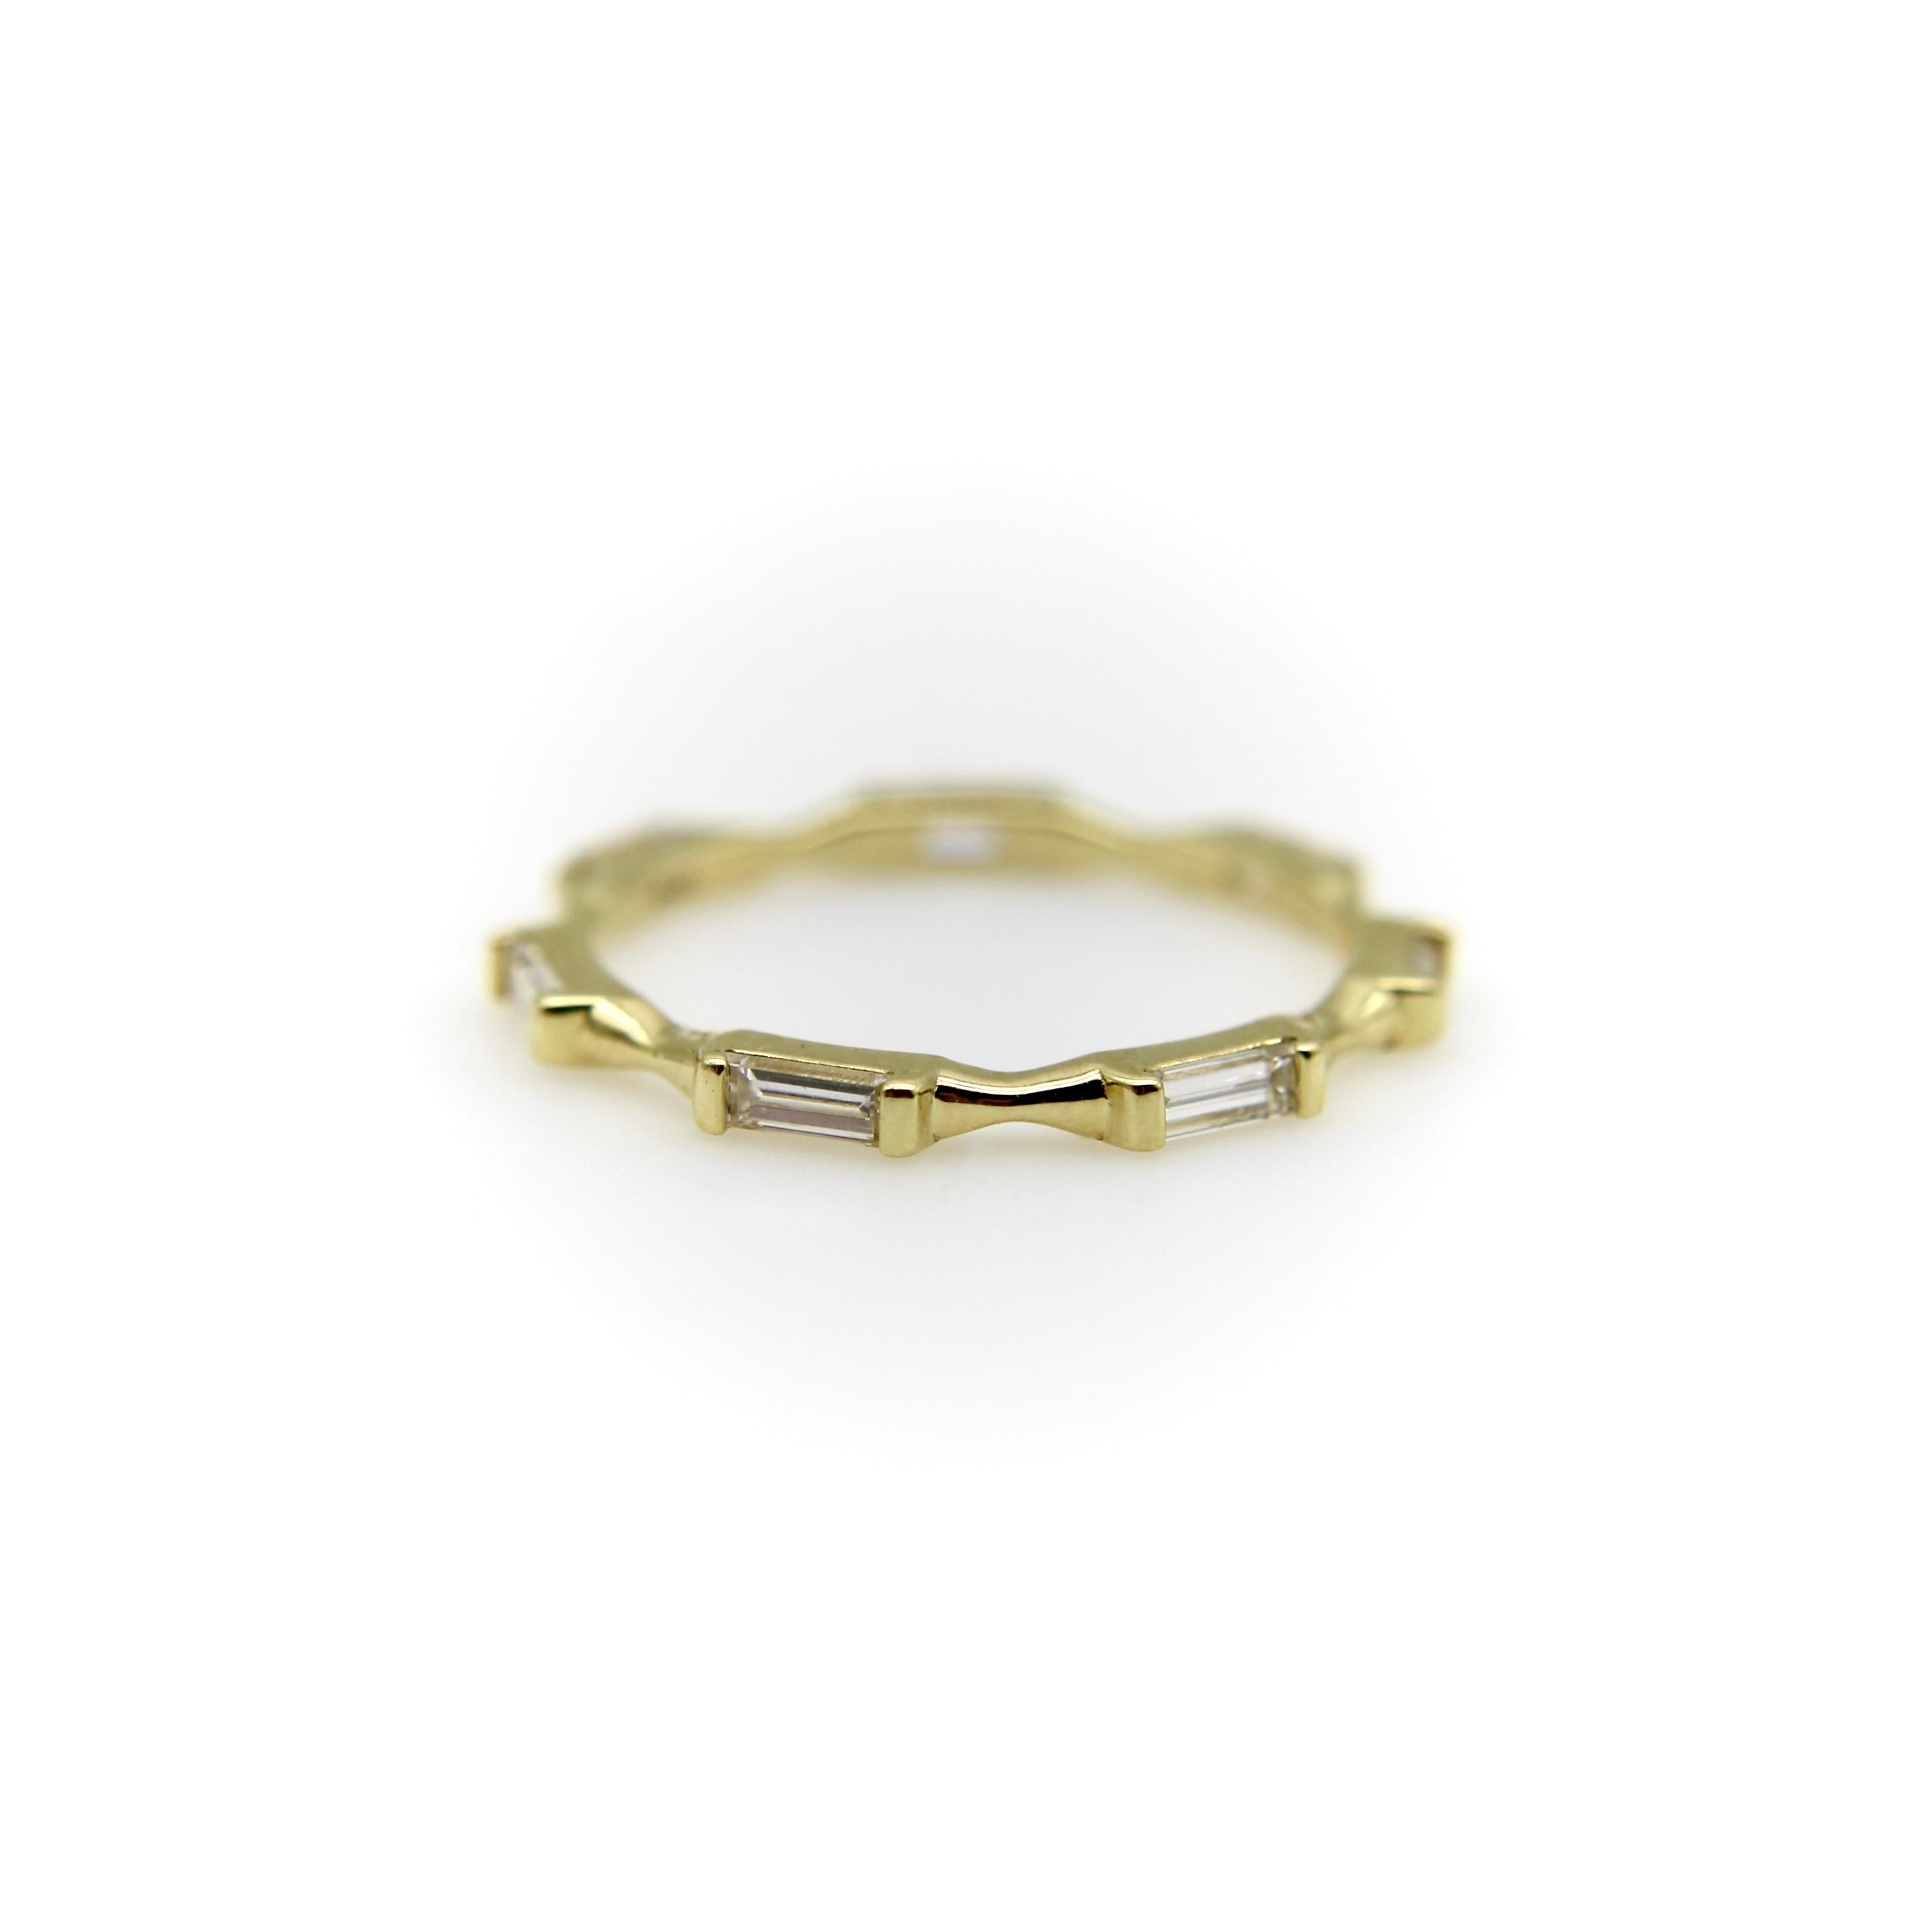 This contemporary take on the classic eternity band is part of Kirsten’s Corner’s signature collection. The ring consists of seven baguette diamonds set horizontally in 18k gold. The band in between each diamond narrows into a cinched, ribbonlike